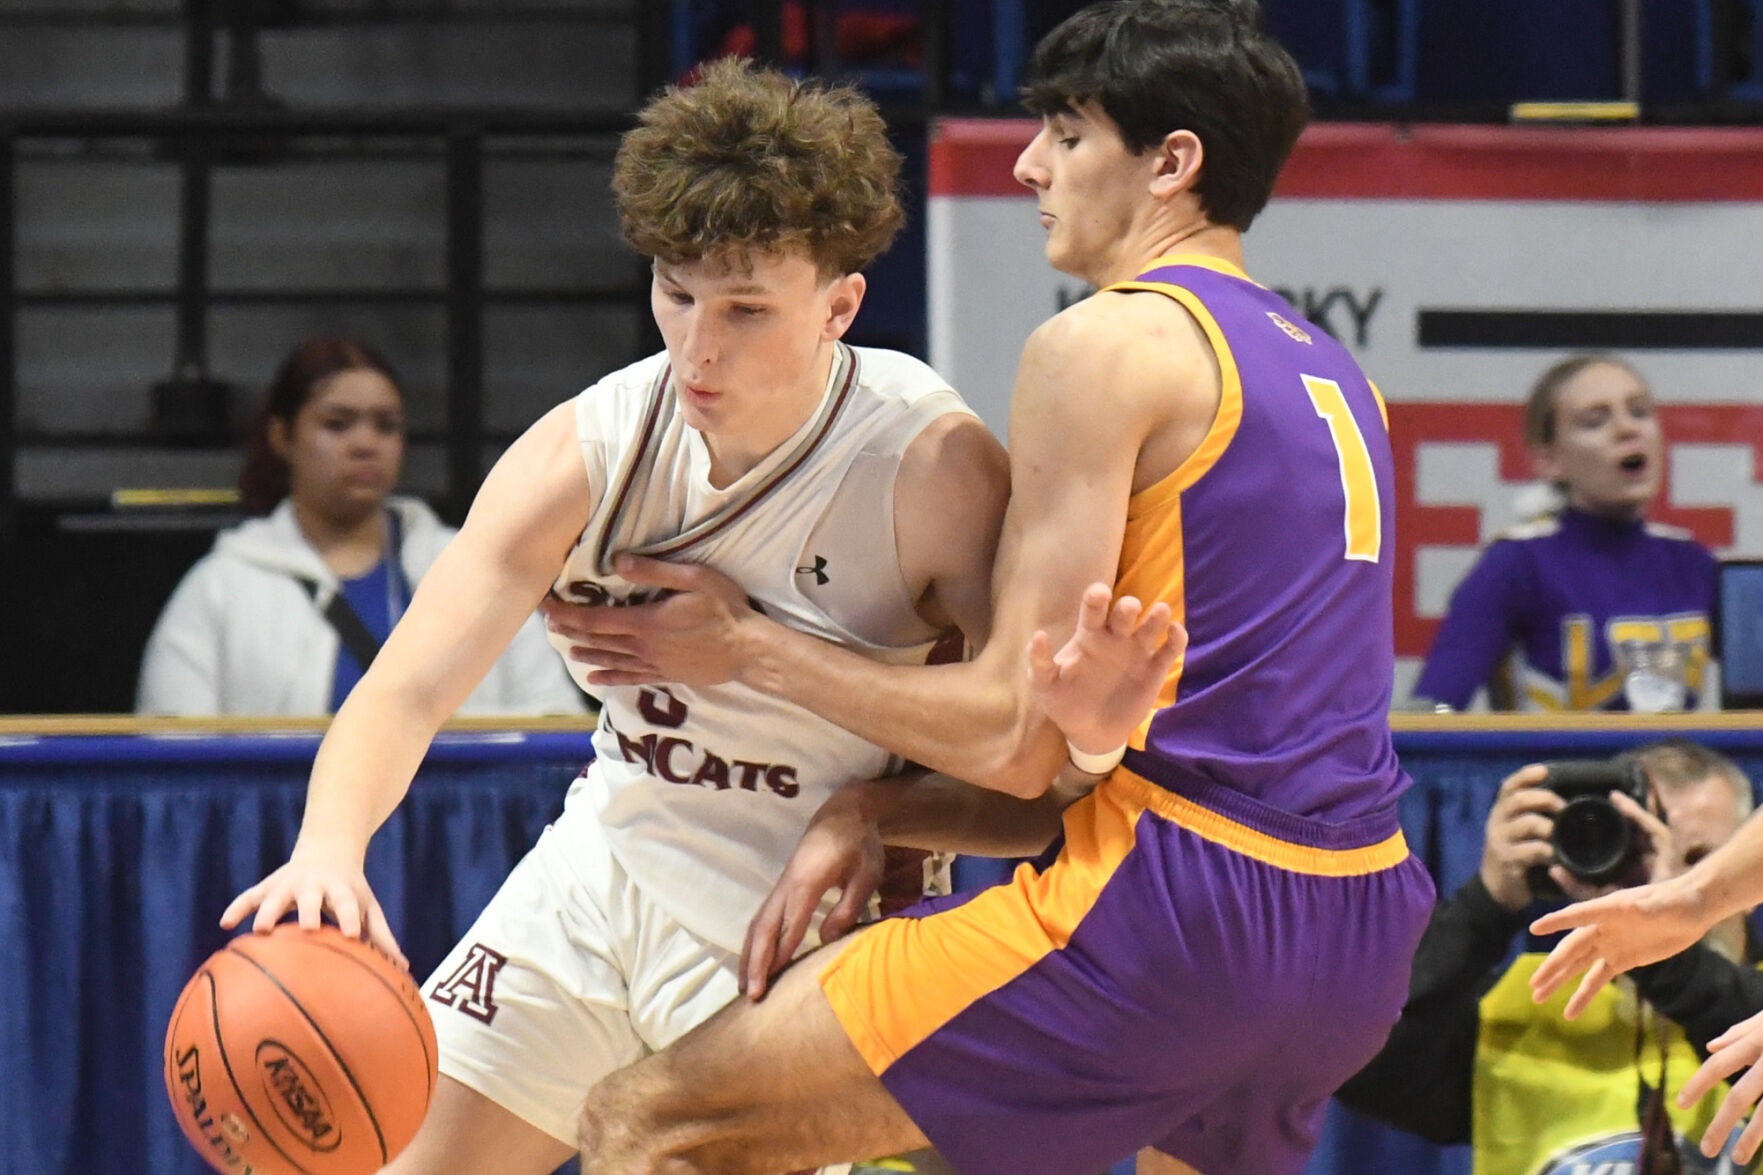 Lyon County Triumphs Over Ashland in Boys Sweet Sixteen Opener with a Last-Minute Rally